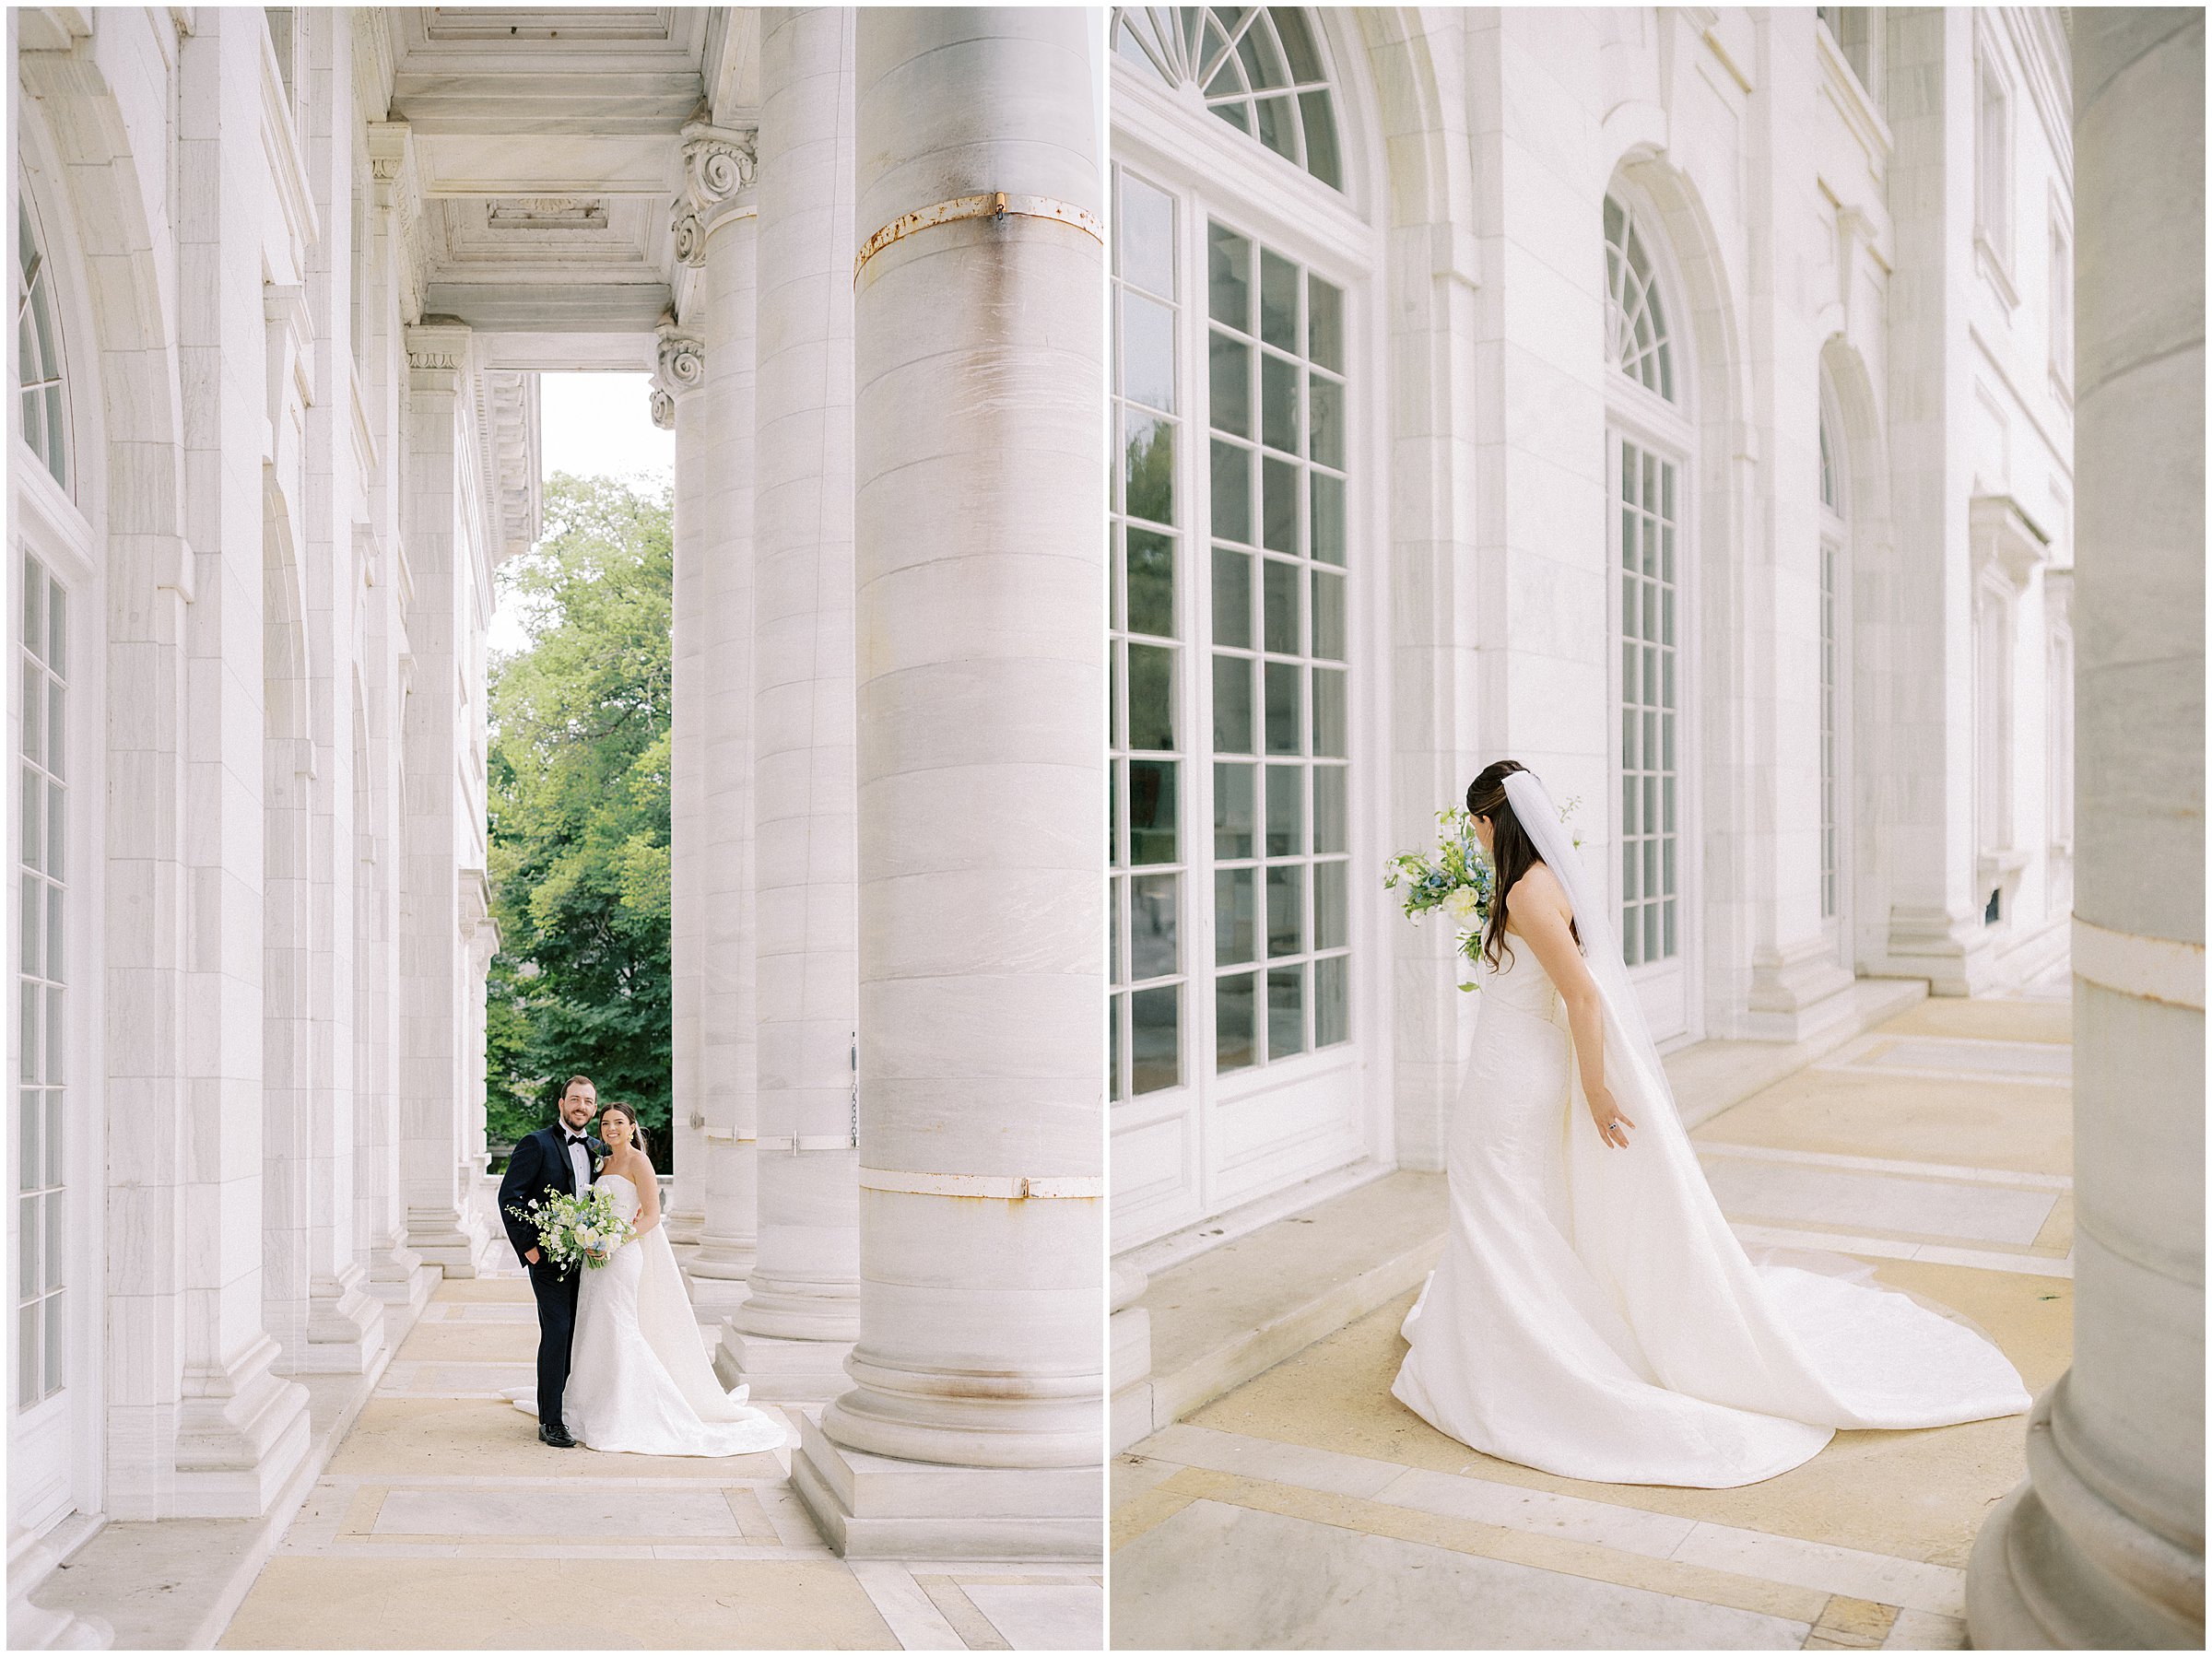 Bride and groom portraits at DAR Constitution Hall